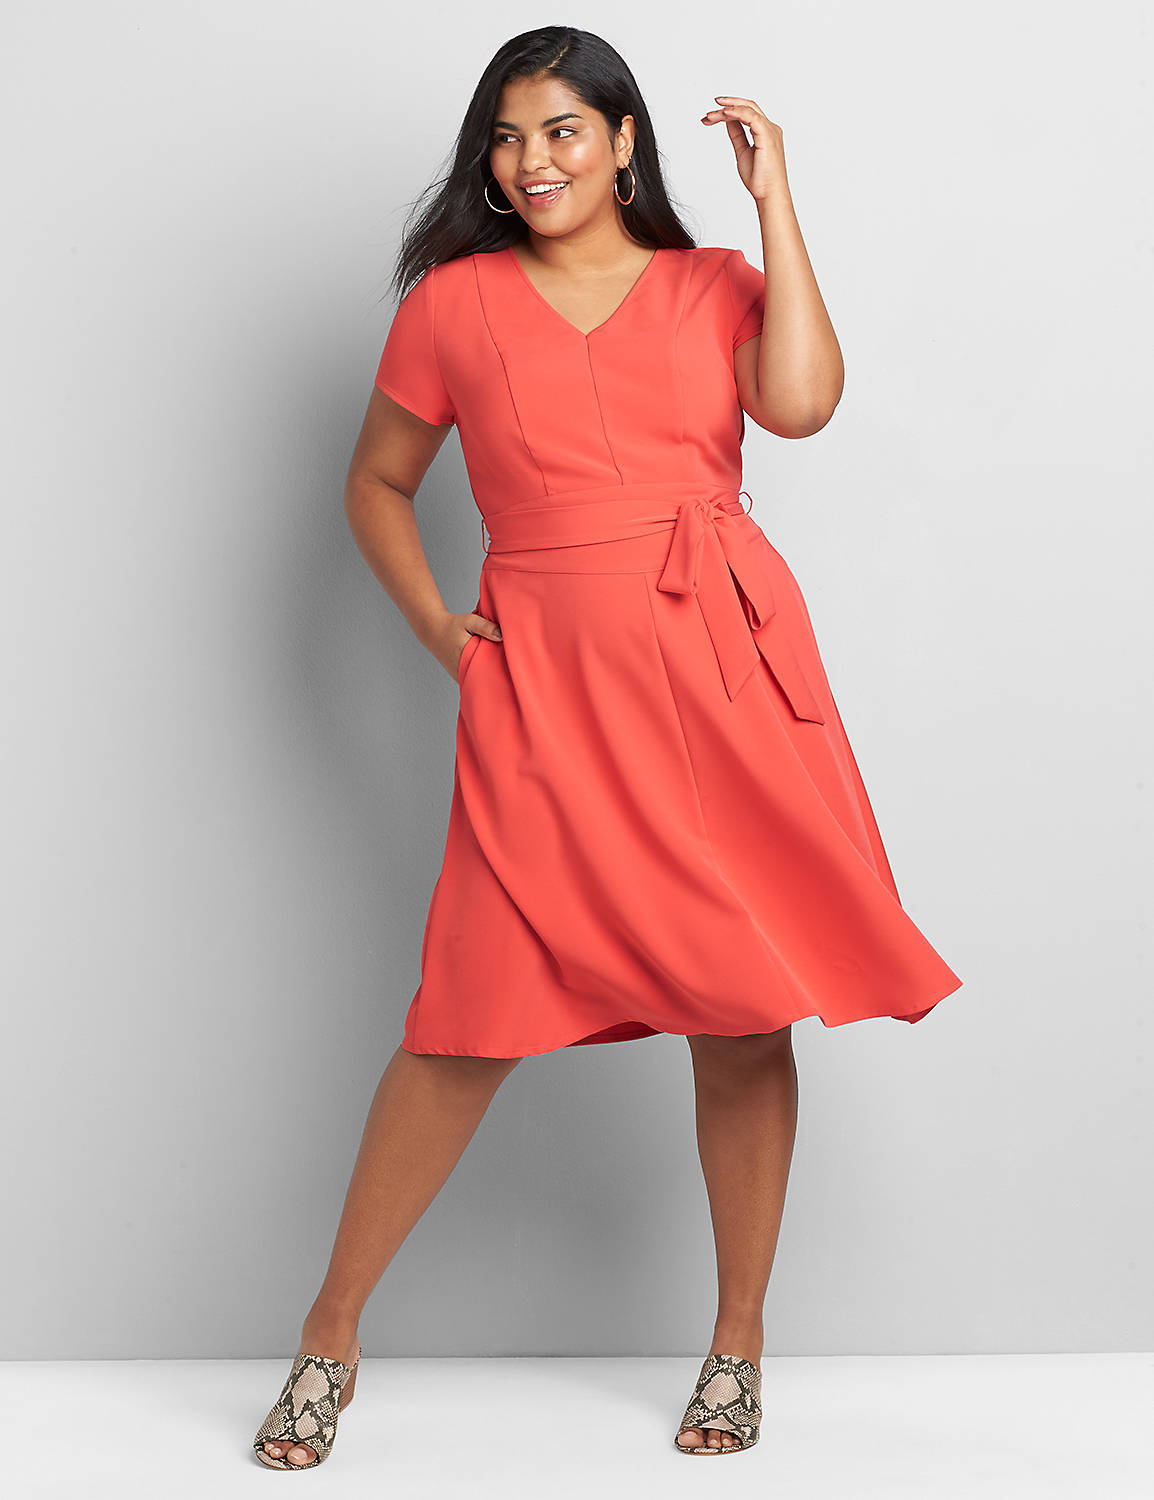 Lena Short Sleeve V Neck Fit and Flare Dress 1119666:Starfish Coral CSI 0301184:16 Product Image 1